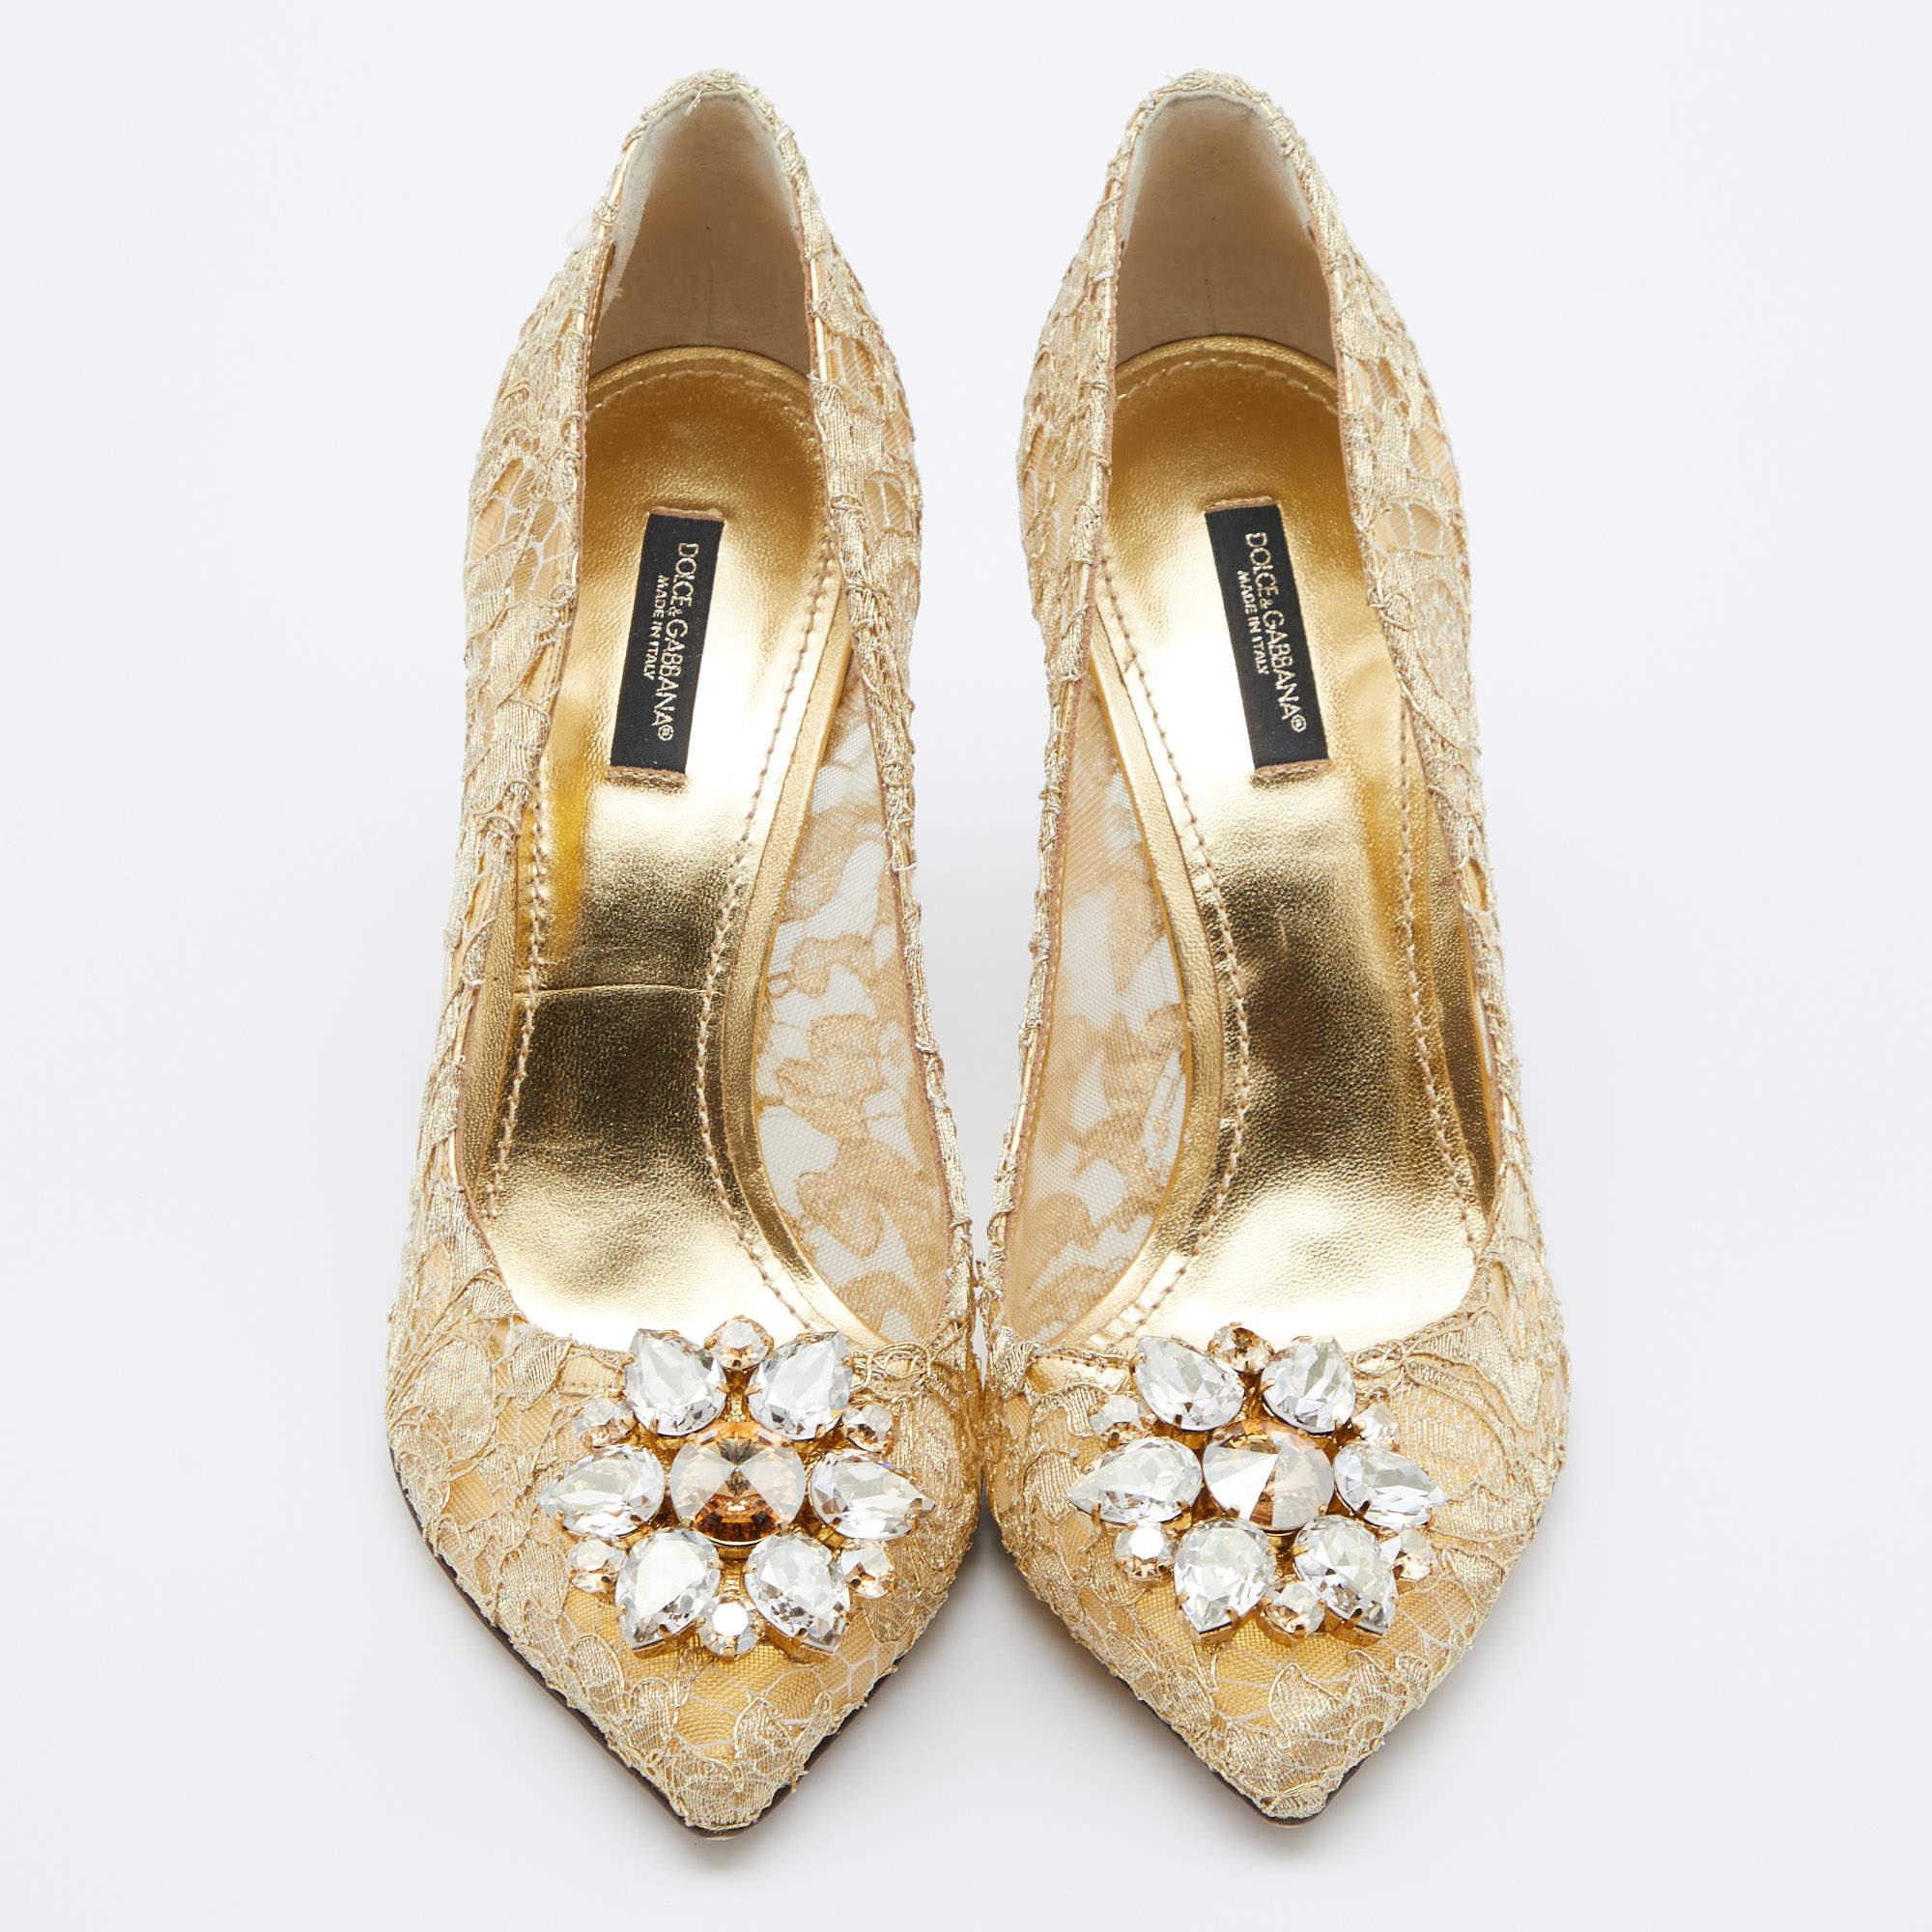 Dolce & Gabbana Gold Lace Crystal Embellished Bellucci Pointed Toe Pumps Size 40 1